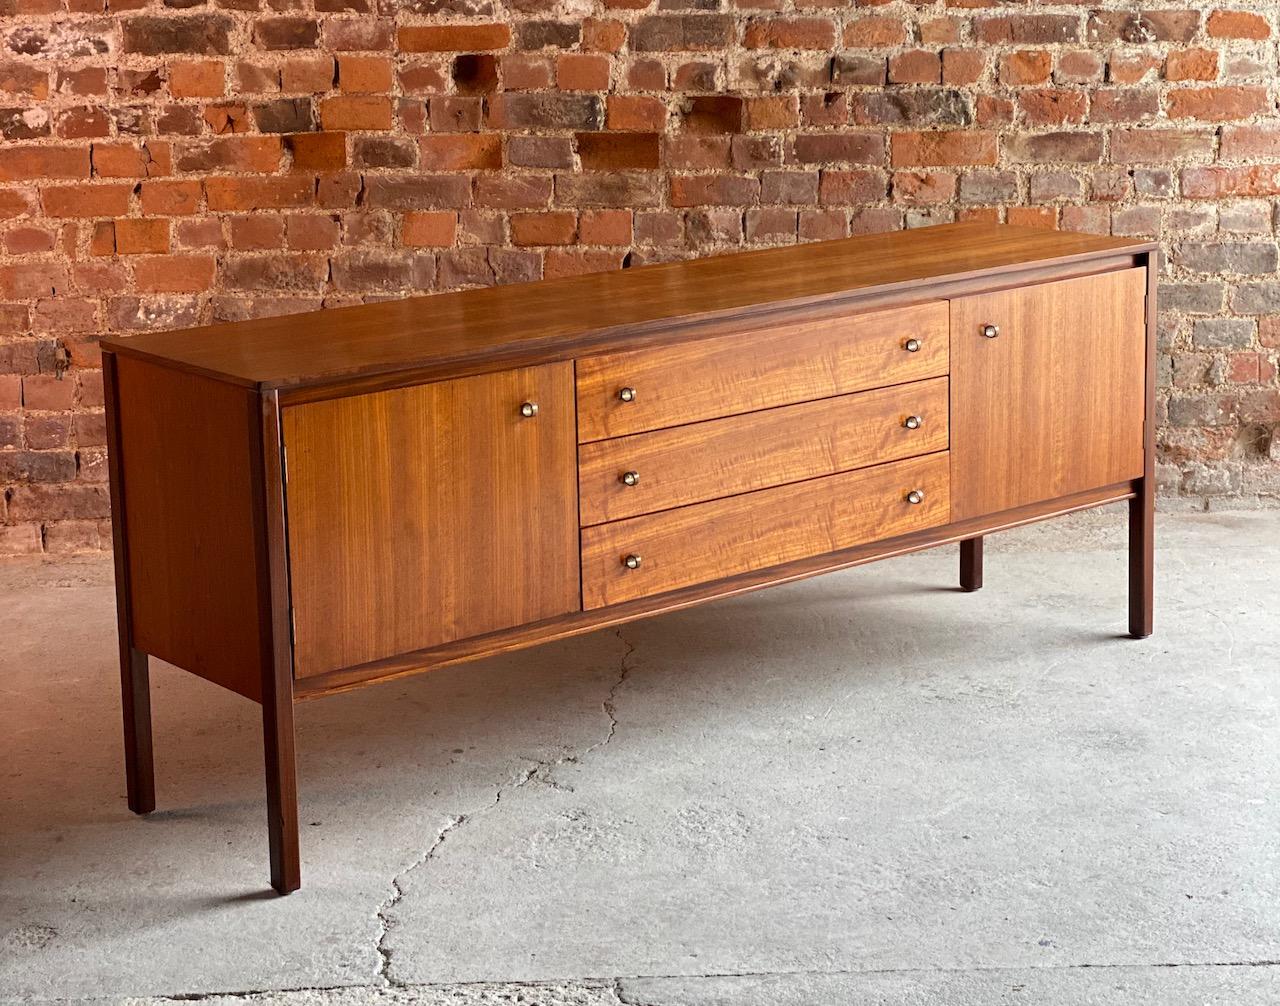 Midcentury Archie Shine Afromosia teak sideboard, circa 1961

Stunning Mid-Century Modern Archie Shine Afromosia Teak sideboard circa 1961, the sideboard with its Afromosia teak finish has two cupboards either side of four central pullout /